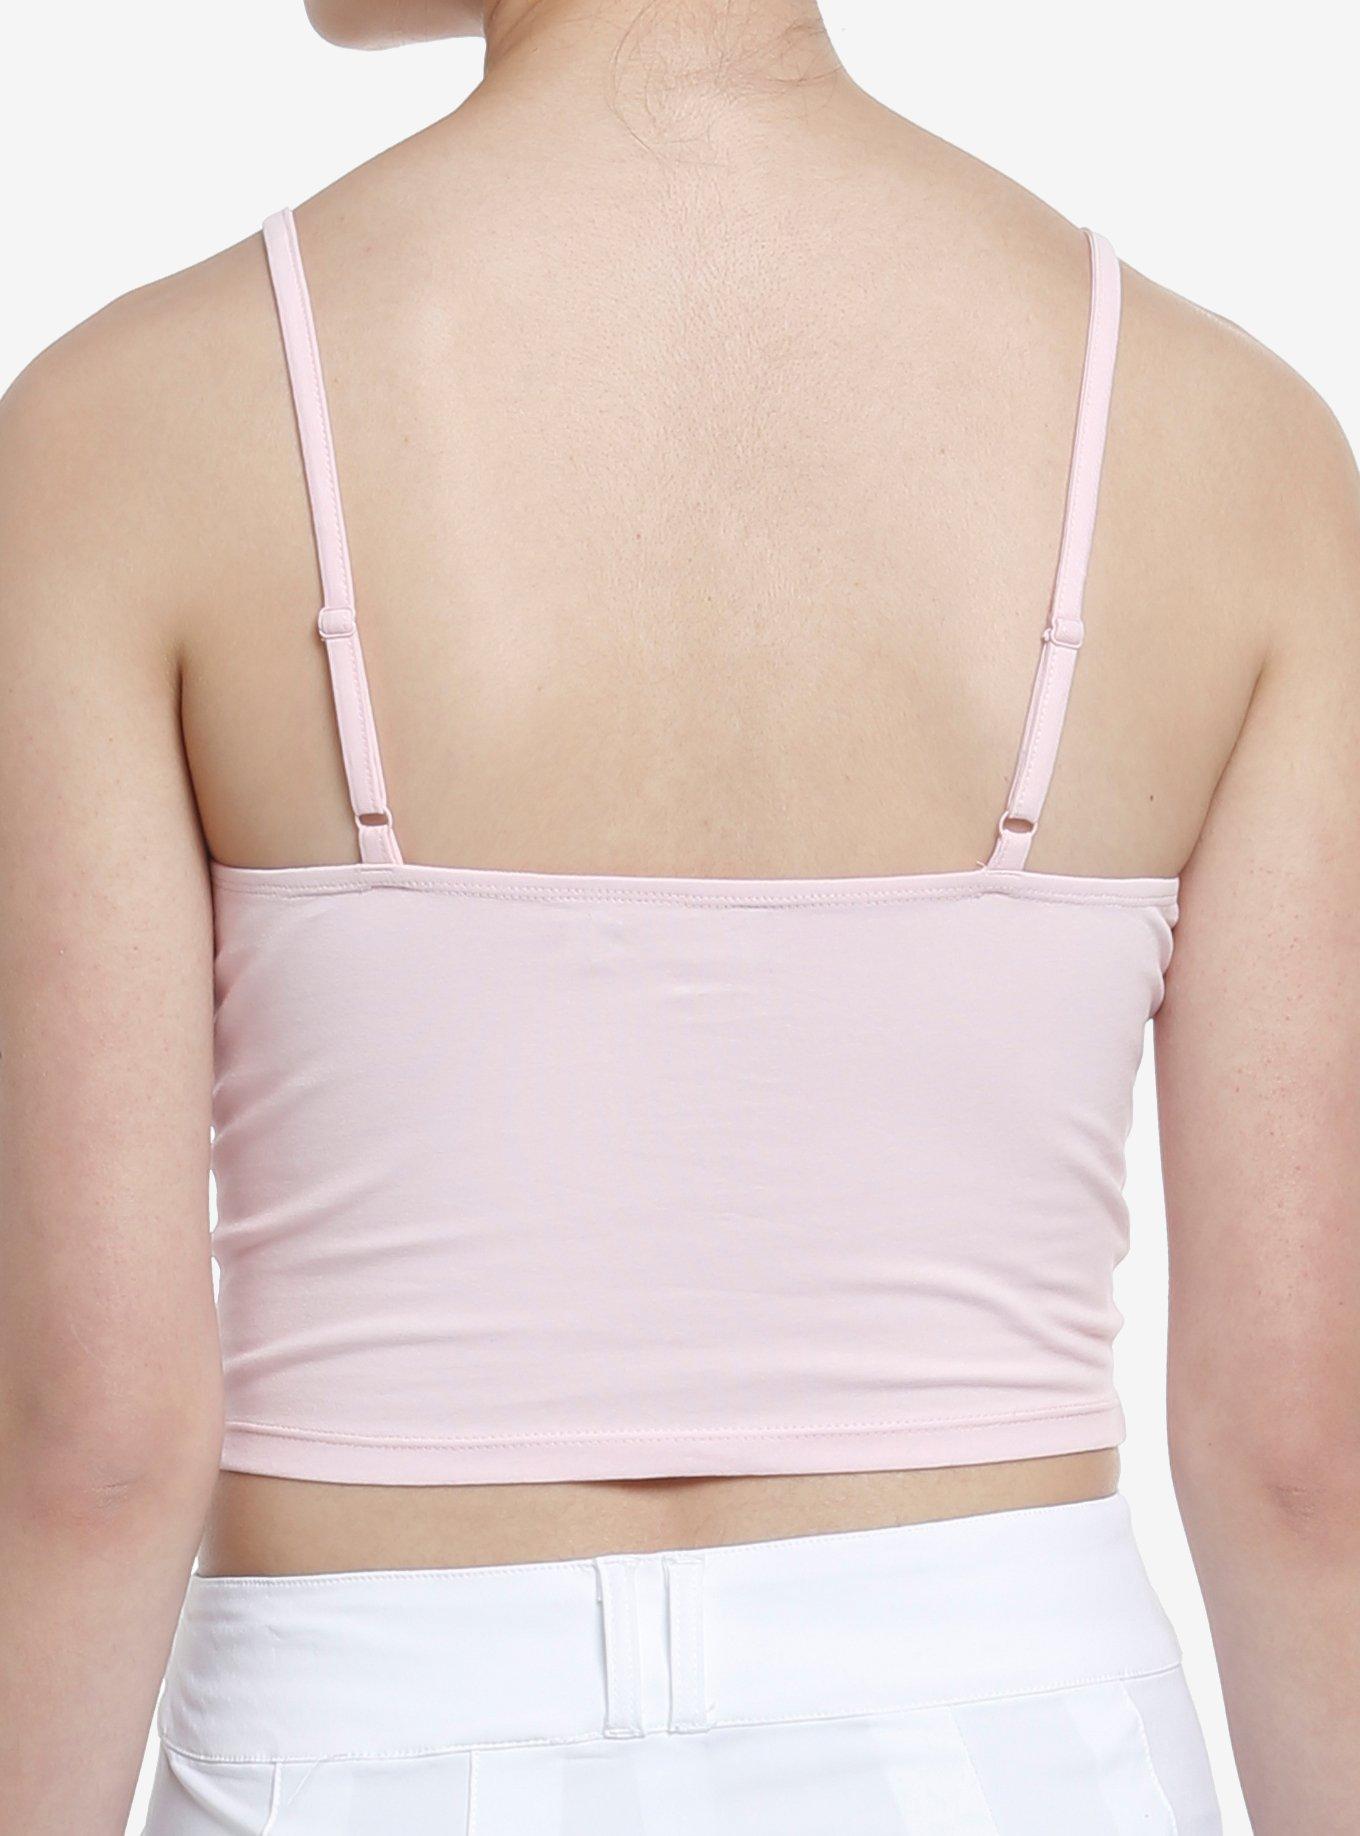 Sweet Society Pink & White Bow Strappy Girls Cami, PINK, alternate